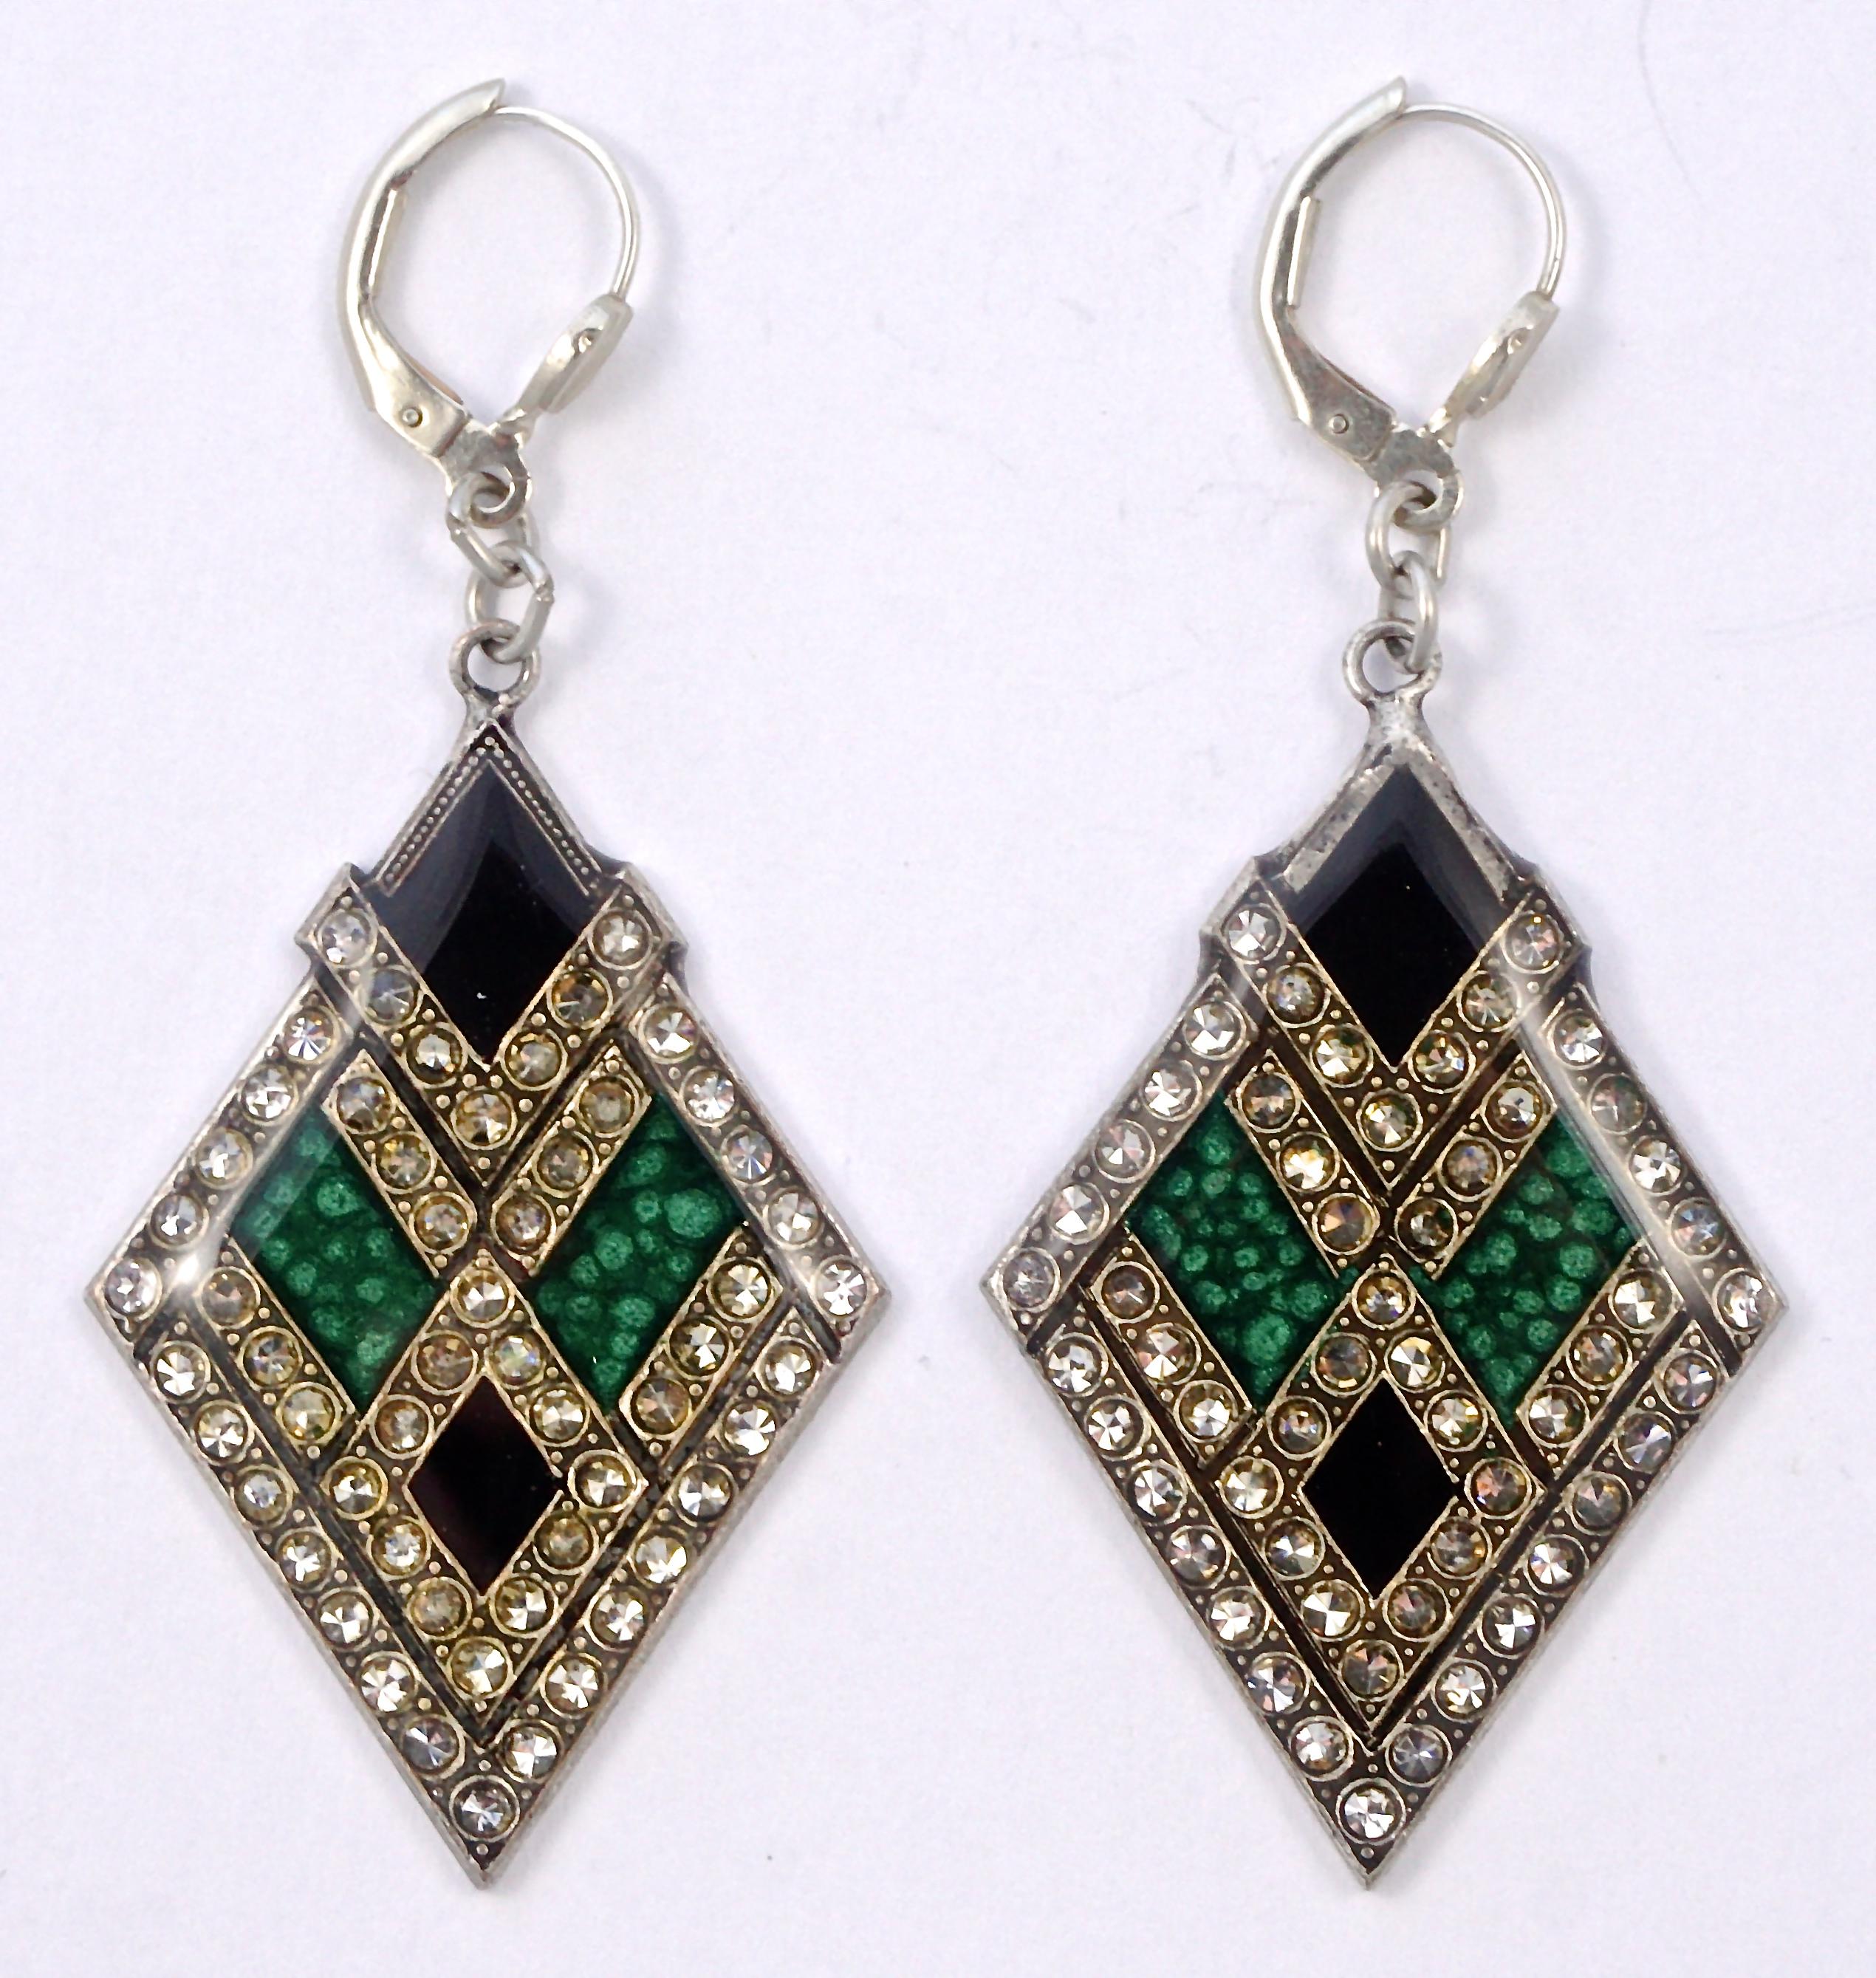 Fabulous Pierre Bex antique finish silver plated Art Deco style lever back earrings. The lovely diamond shaped drops are embellished with crystal rhinestones, and feature plain black and textured green enamel. The drops measure length 4.1cm / 1.61